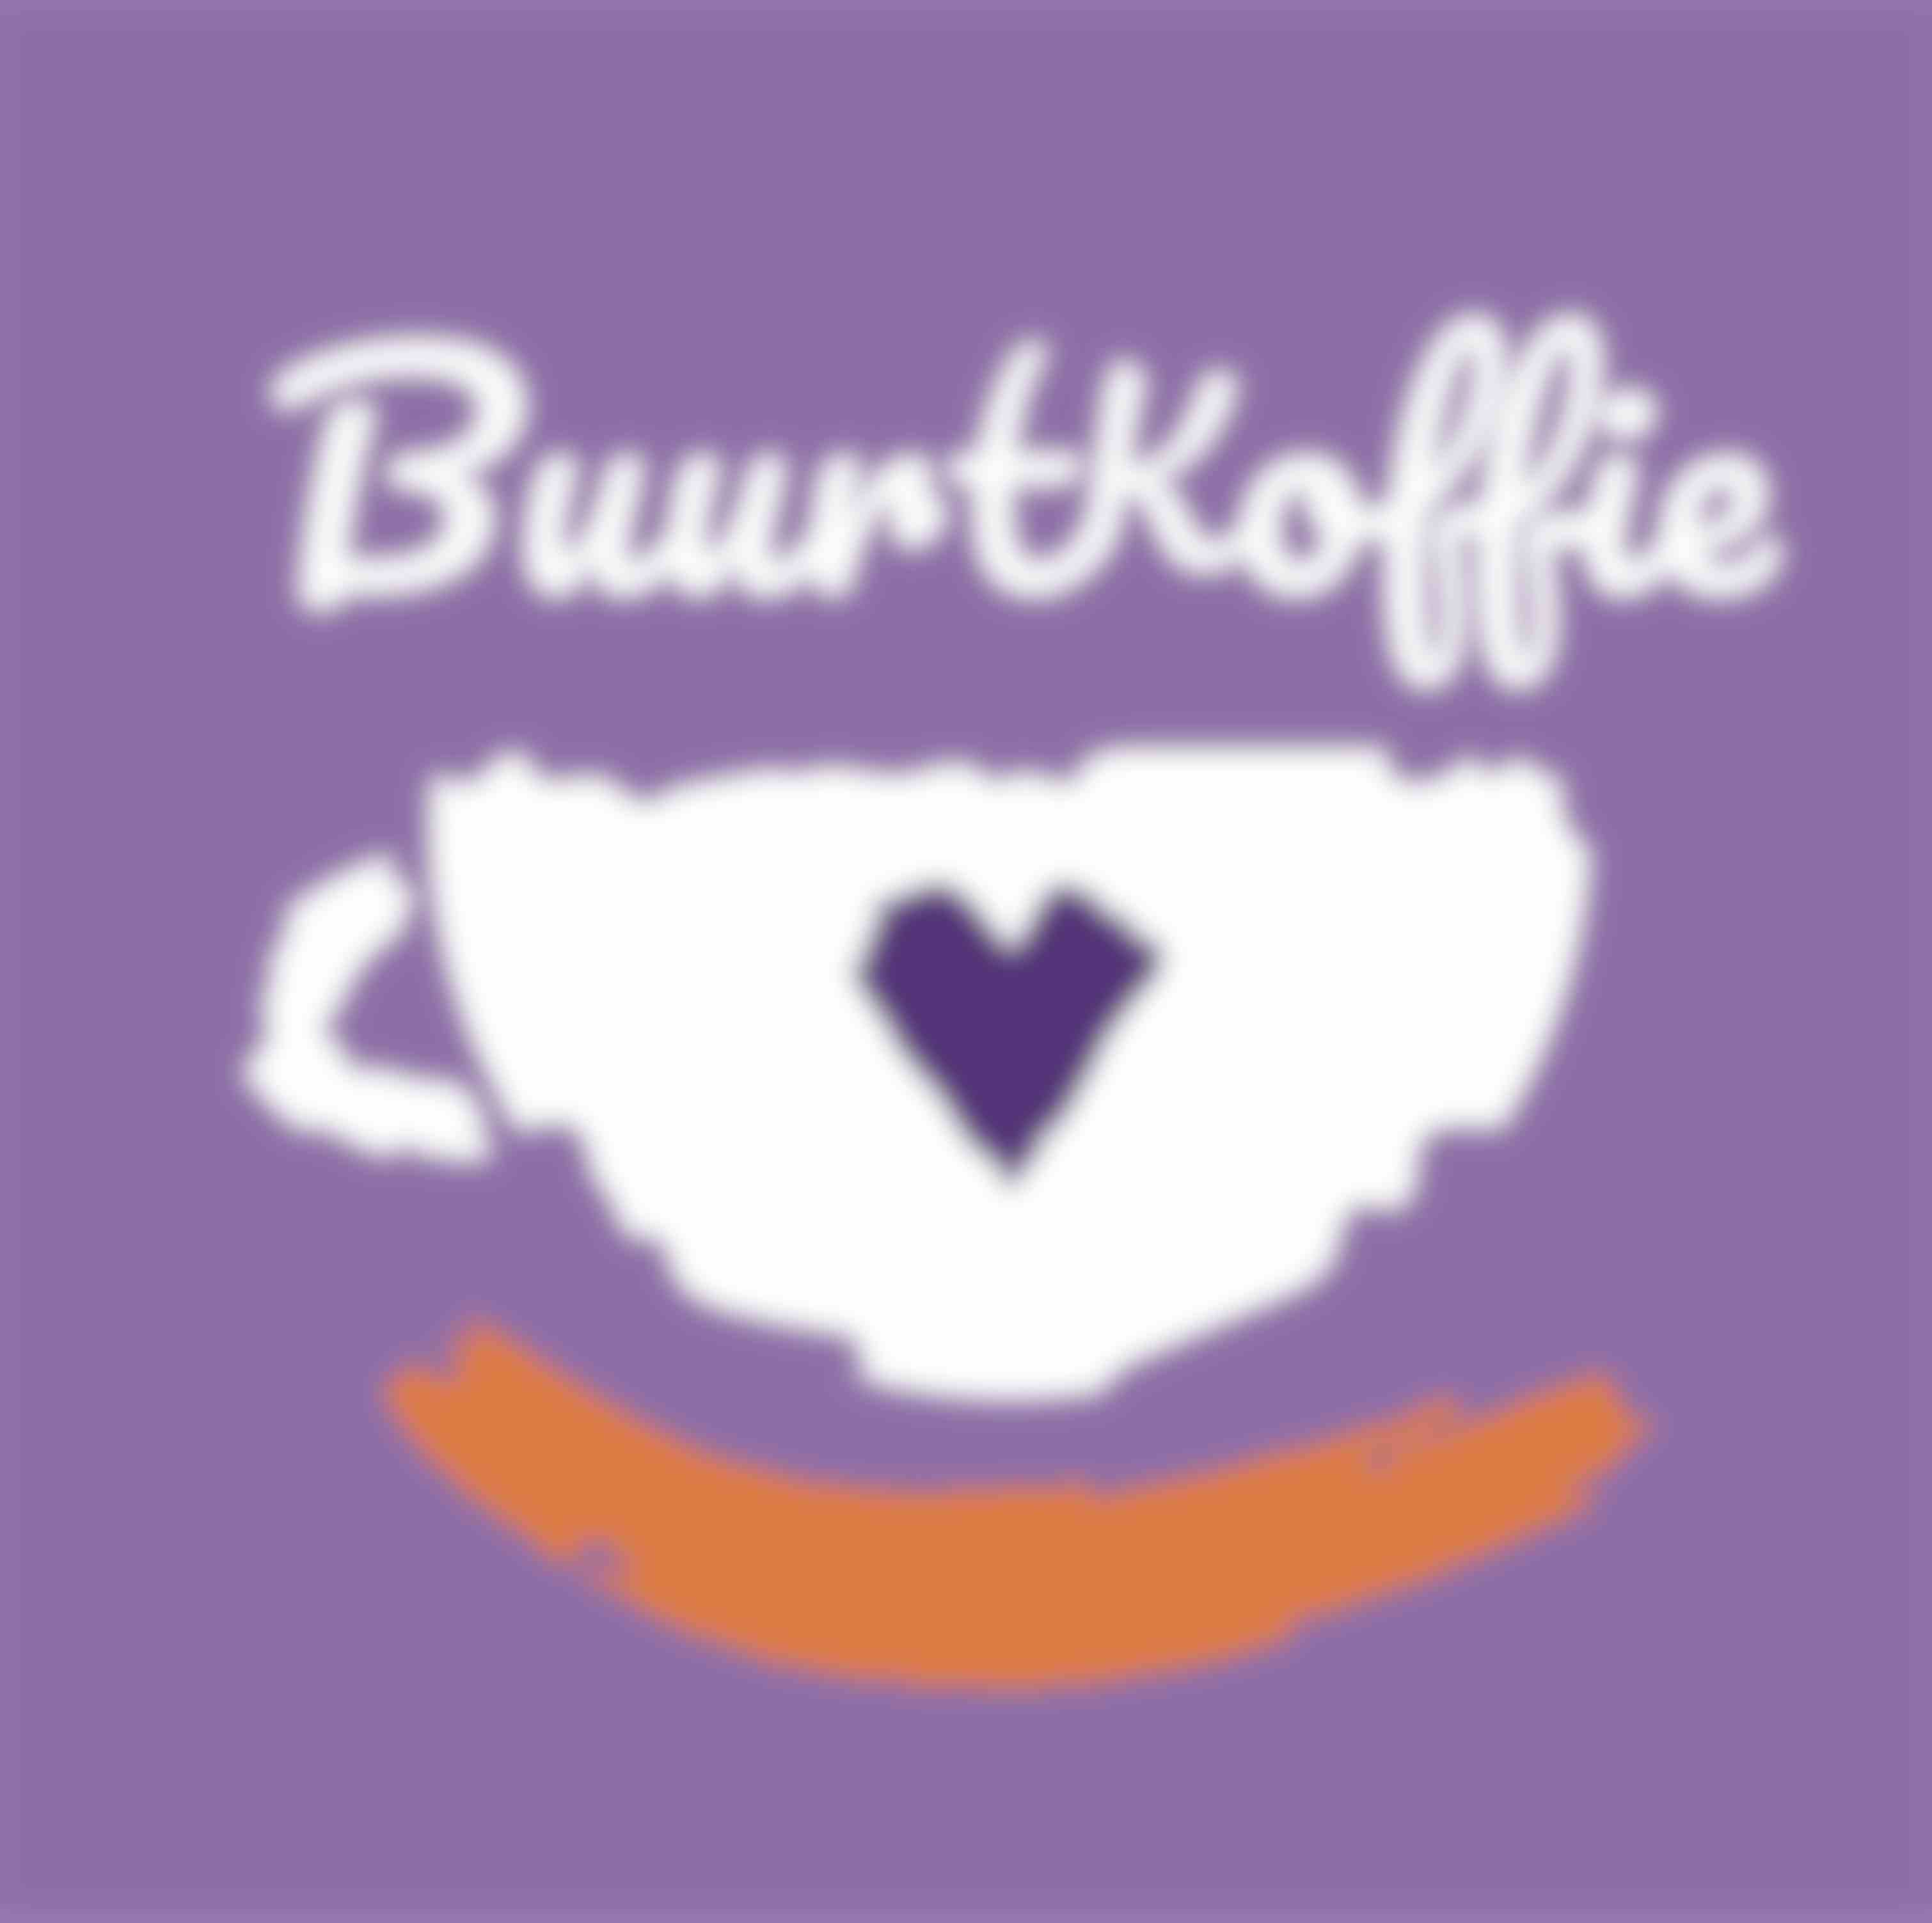 Driver and/or hostess 'Buurtkoffie Apeldoorn'